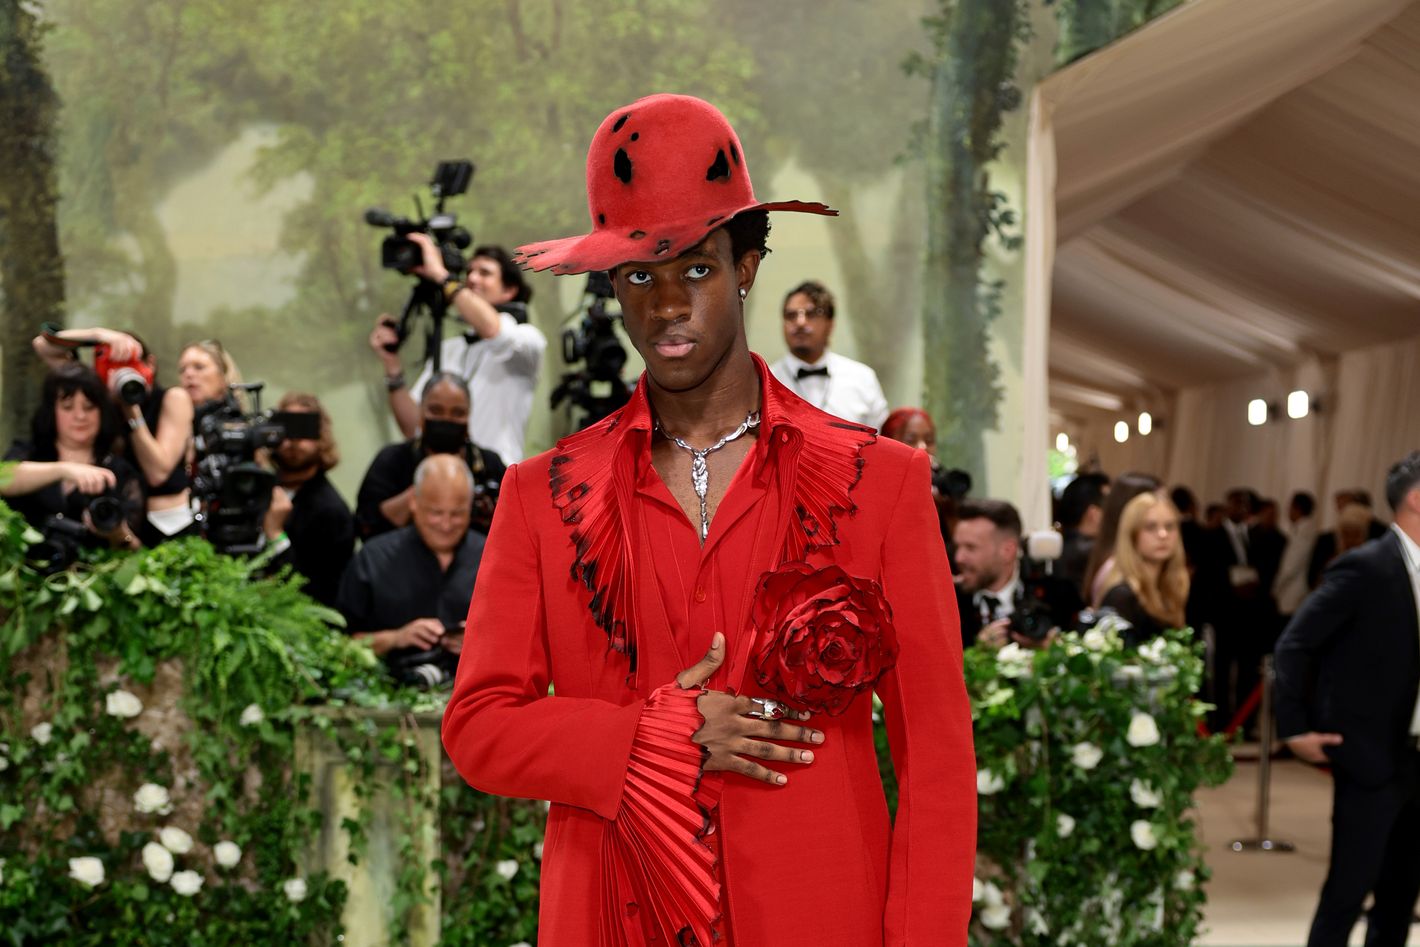 Where Are All the TikTok Influencers at the Met Gala?